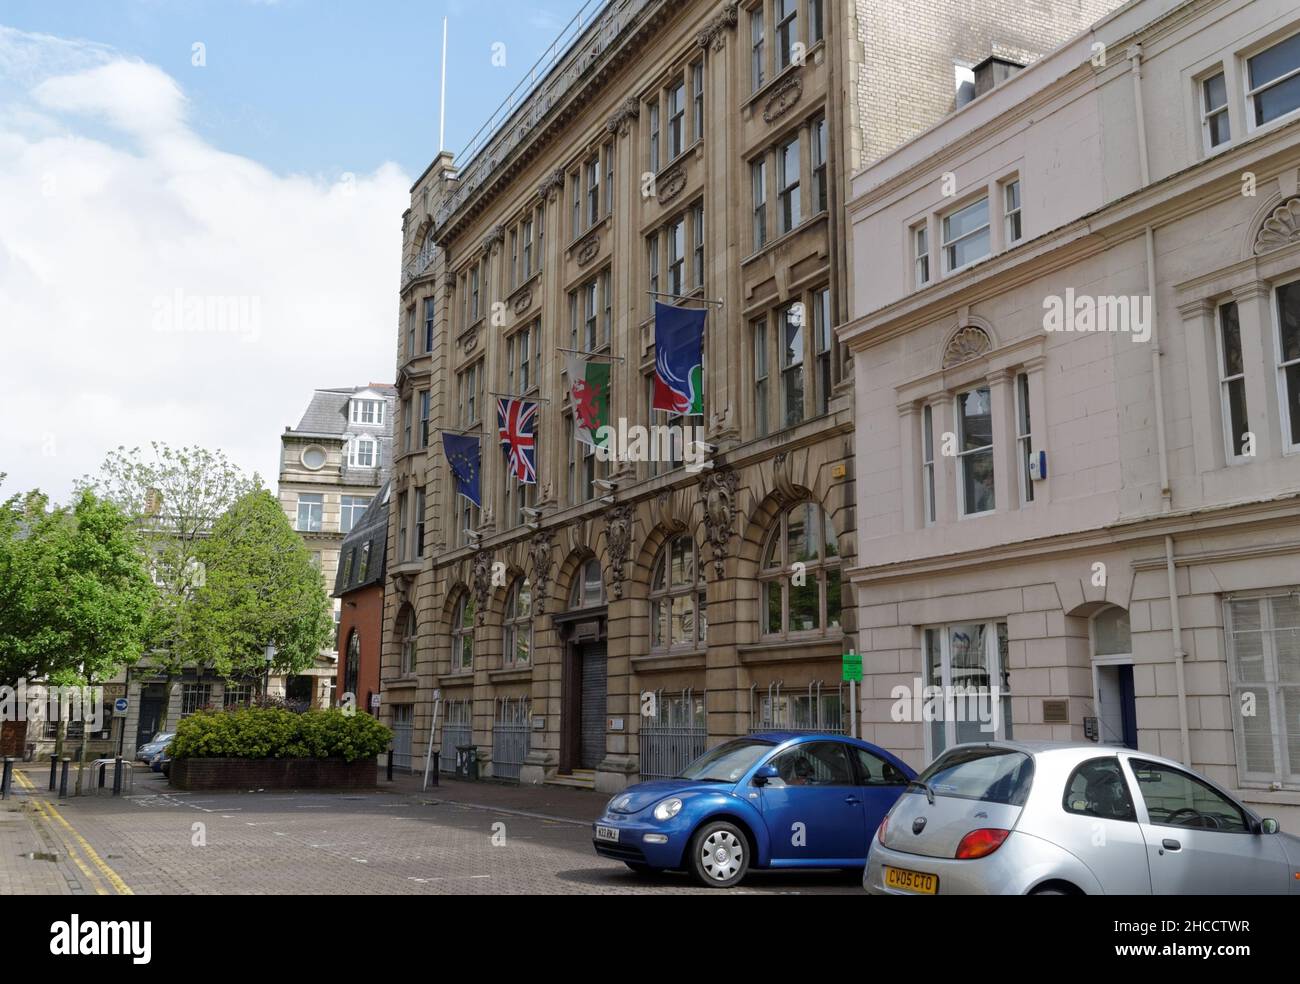 A scene showing Baltic House in Mount Stuart Square, Cardiff, Home of the Wales Council for Voluntary Action Stock Photo